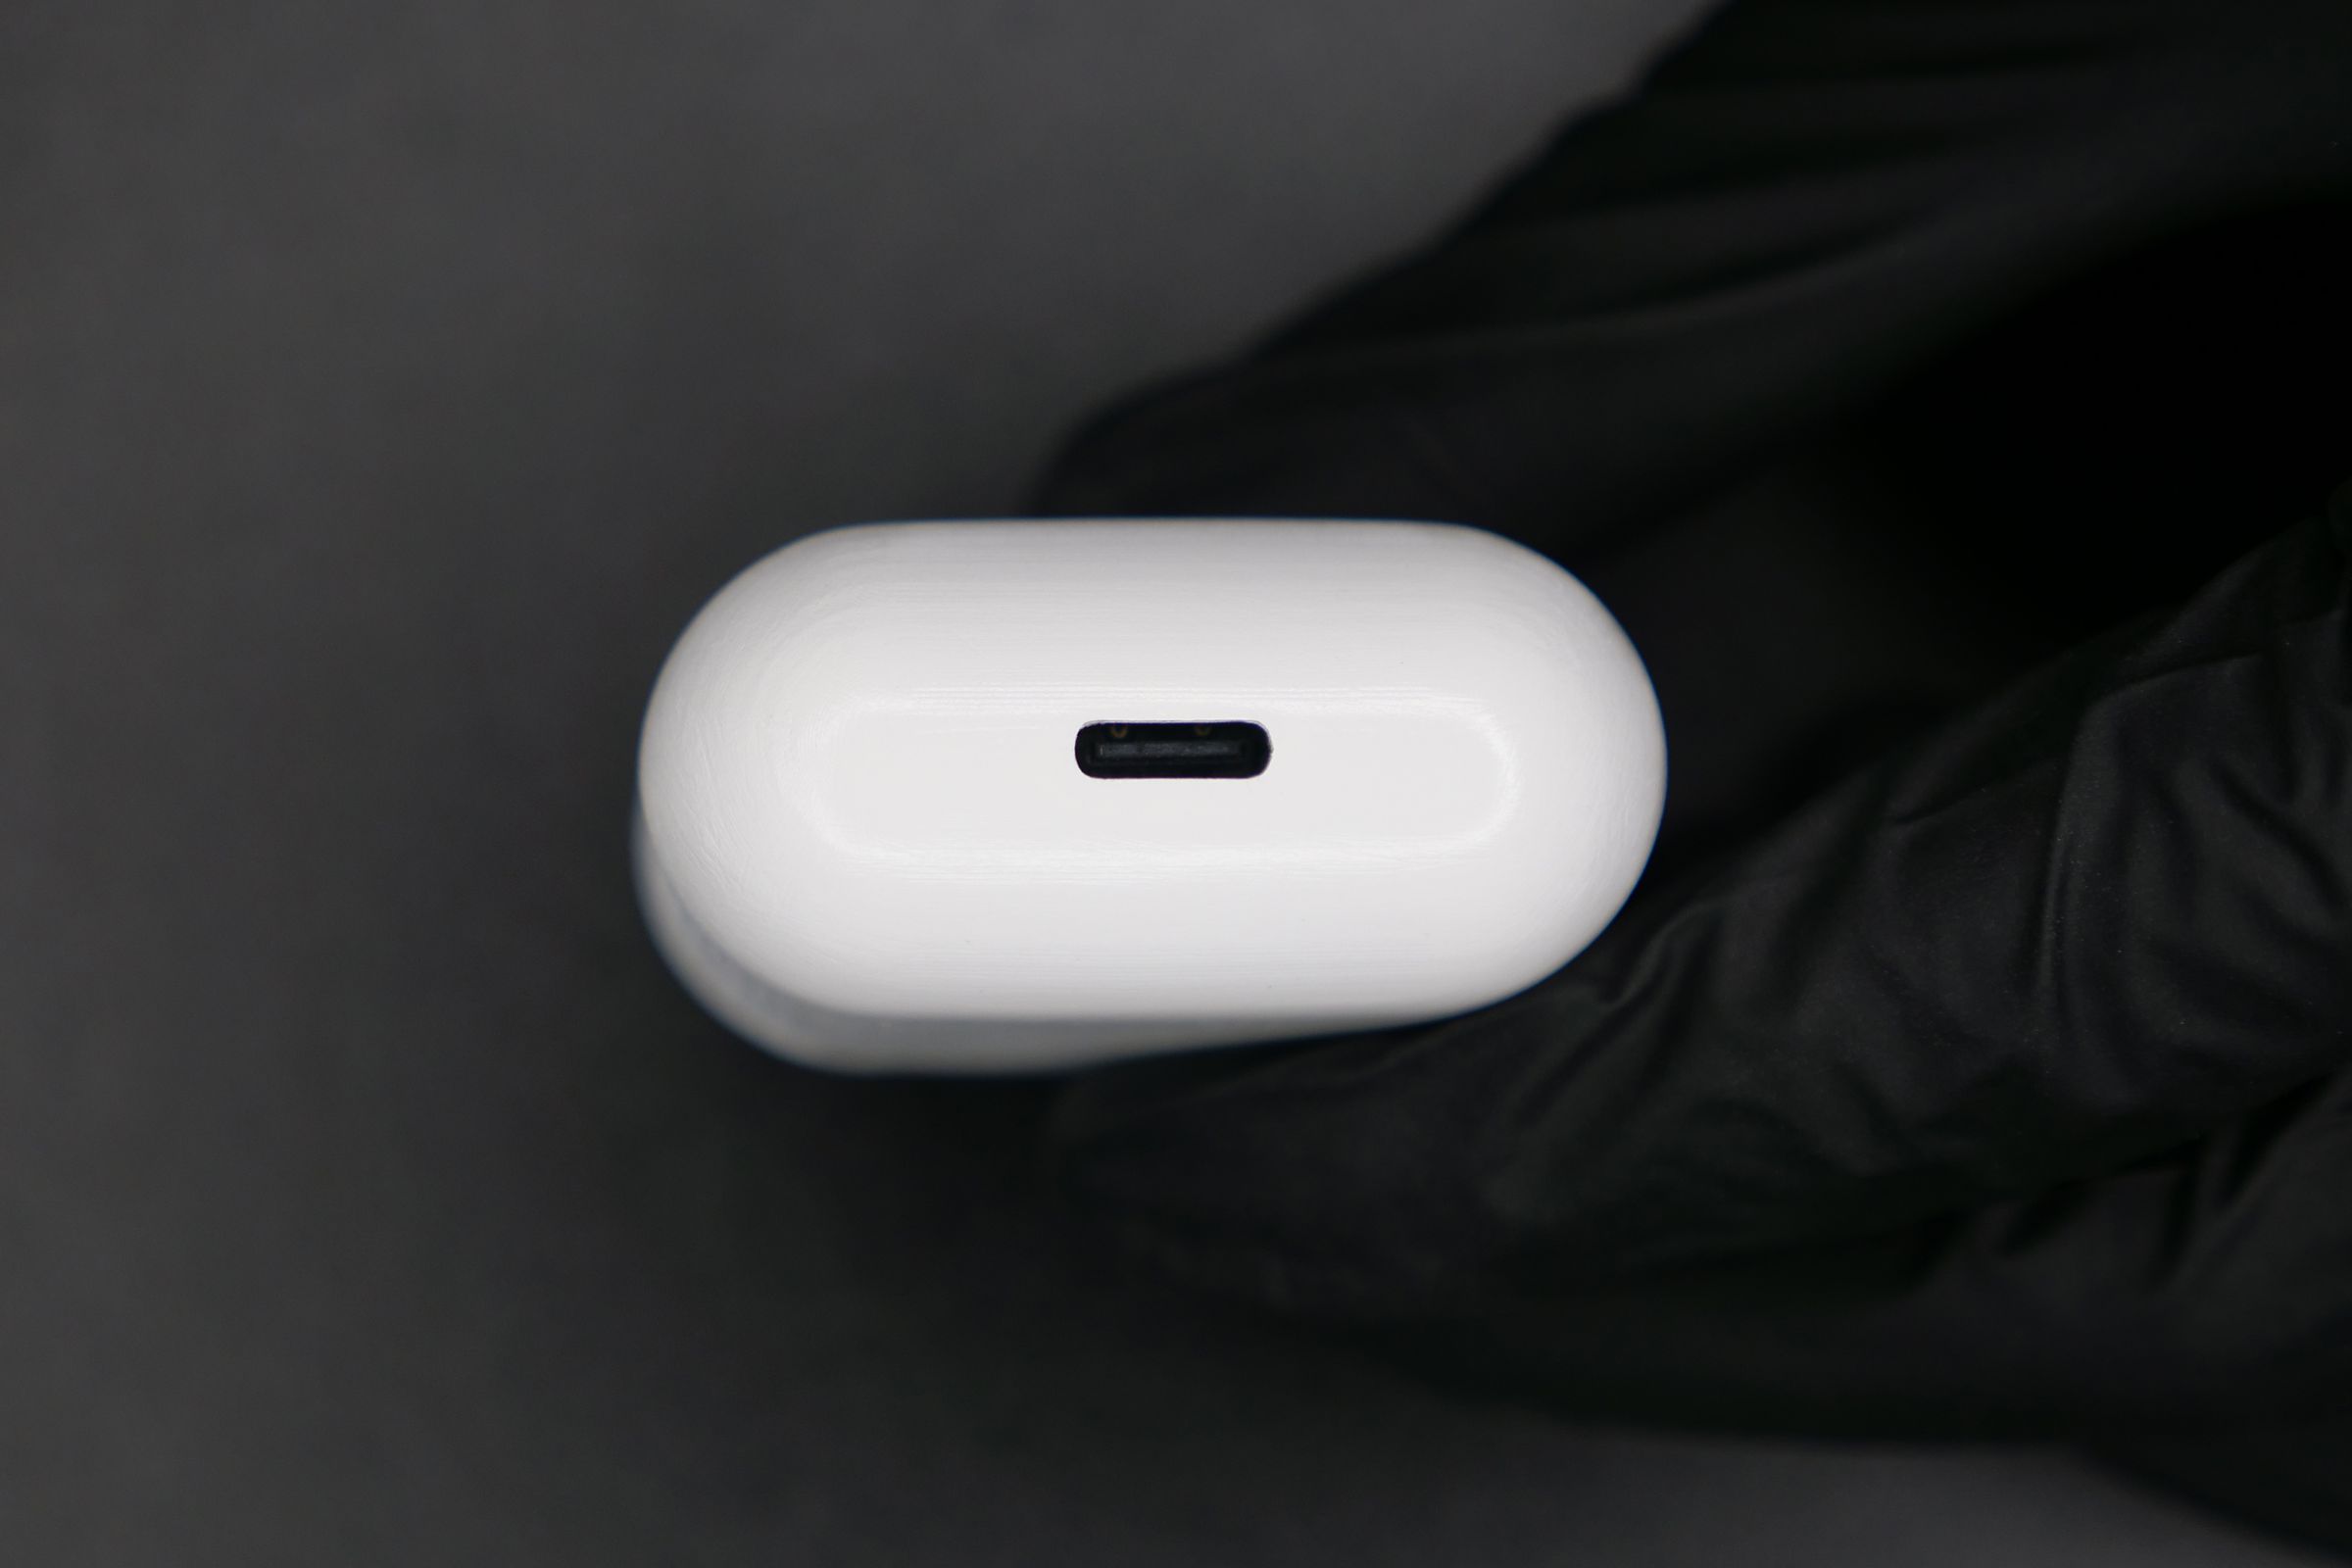 The AirPods’ charging case equipped with a USB-C port.